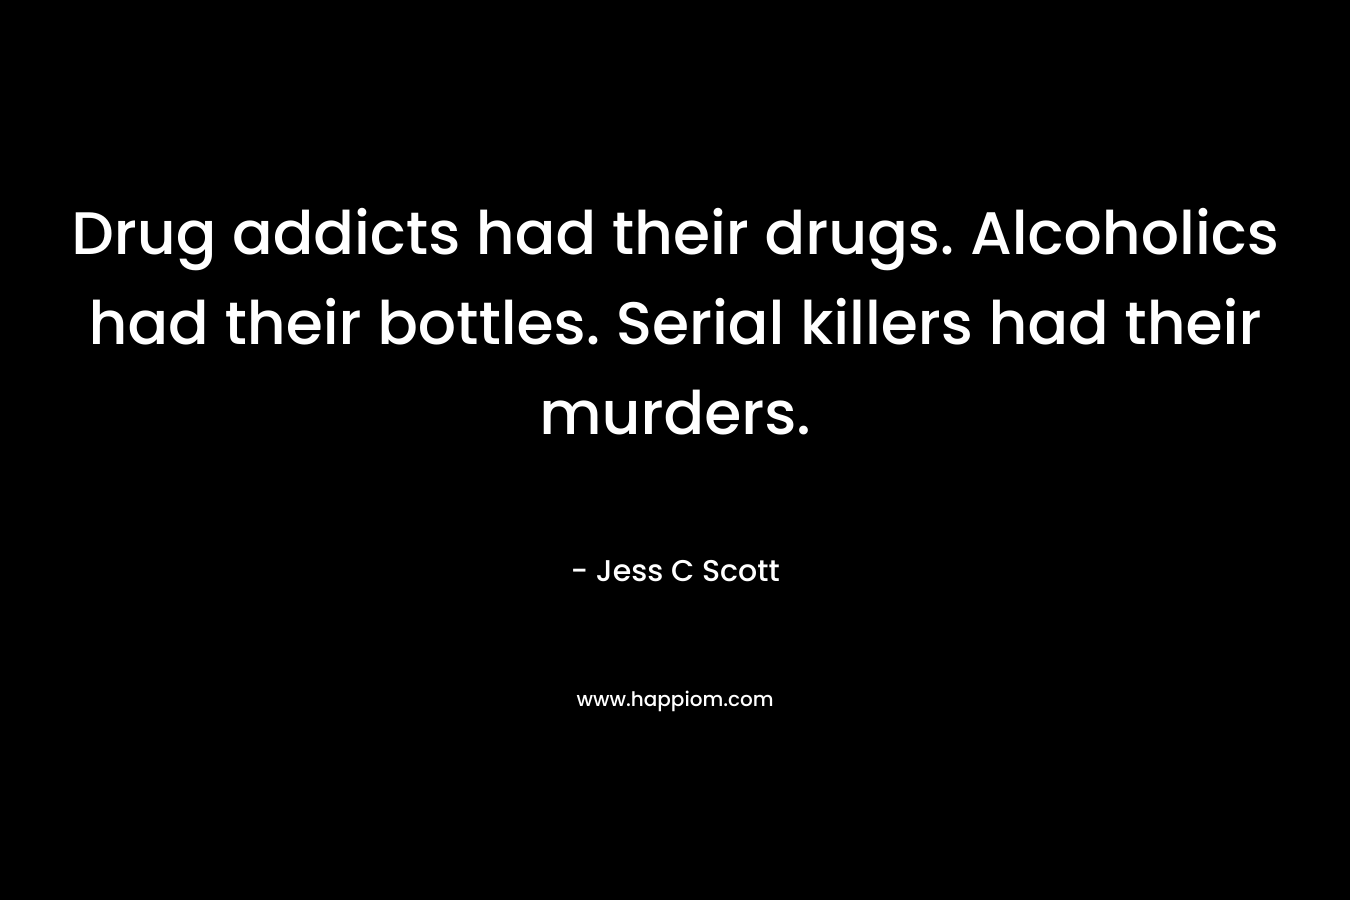 Drug addicts had their drugs. Alcoholics had their bottles. Serial killers had their murders. – Jess C Scott